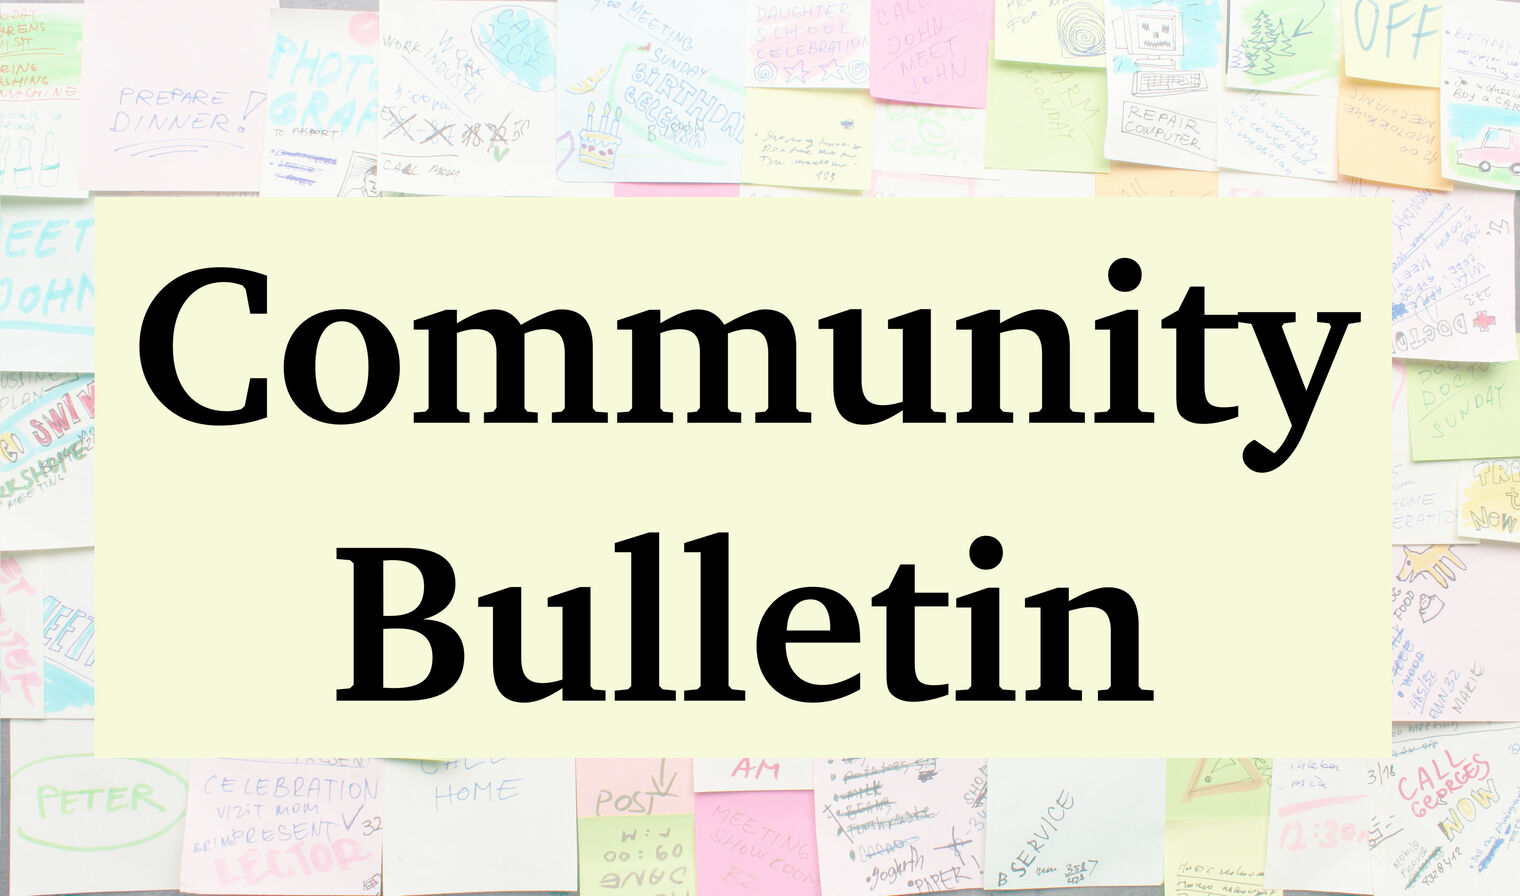 The words Community bulletin written in of a collage of post it